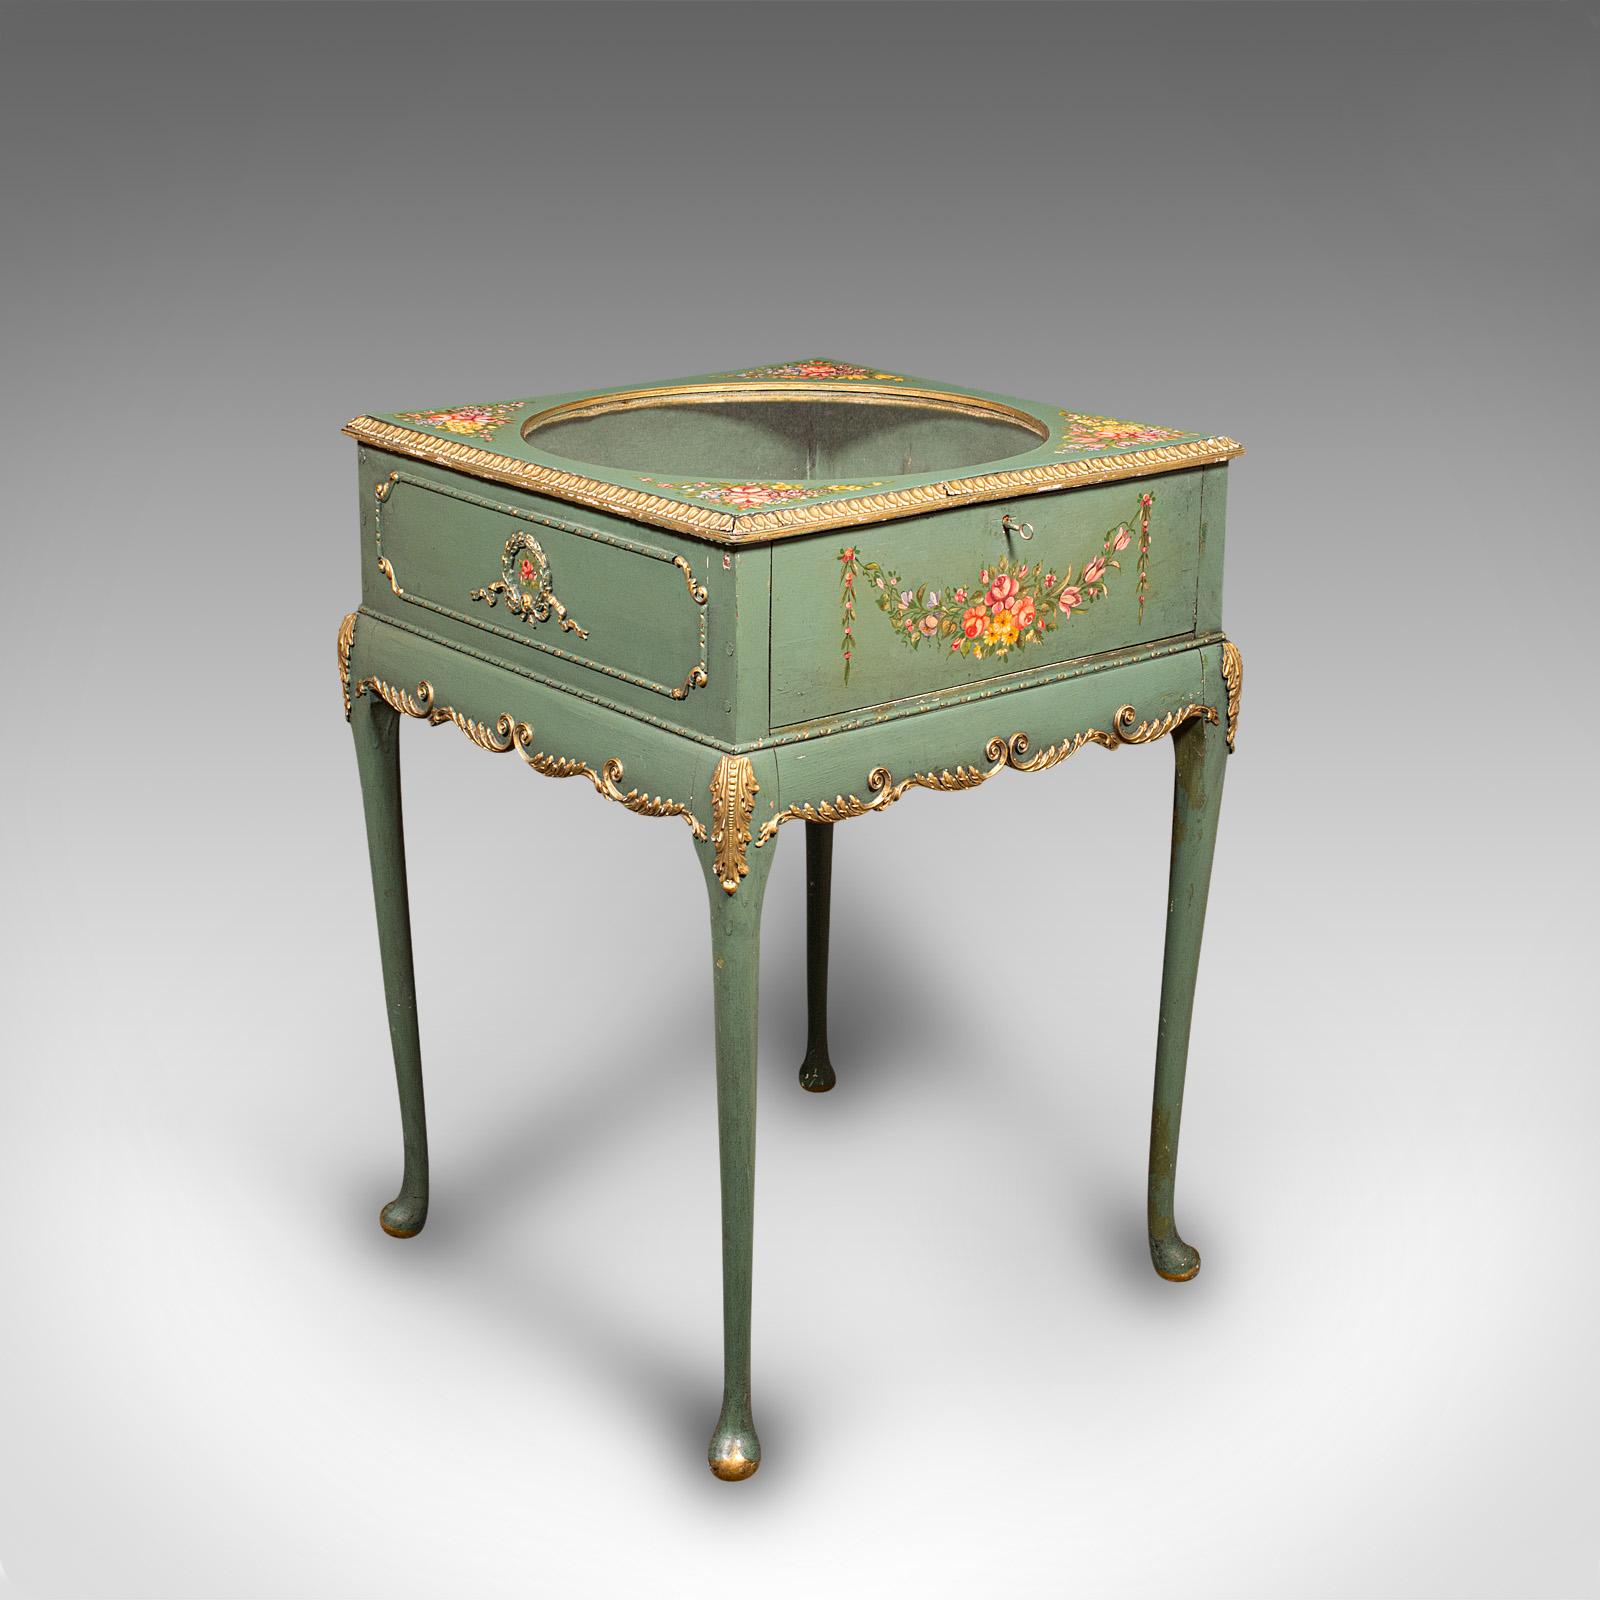 This is an antique hand-painted bijouterie table. A French, decorated pine and glass display cabinet, dating to the late Victorian period, circa 1900.

Delightfully presented bijouterie display case, graced with brilliant colour
Displaying a